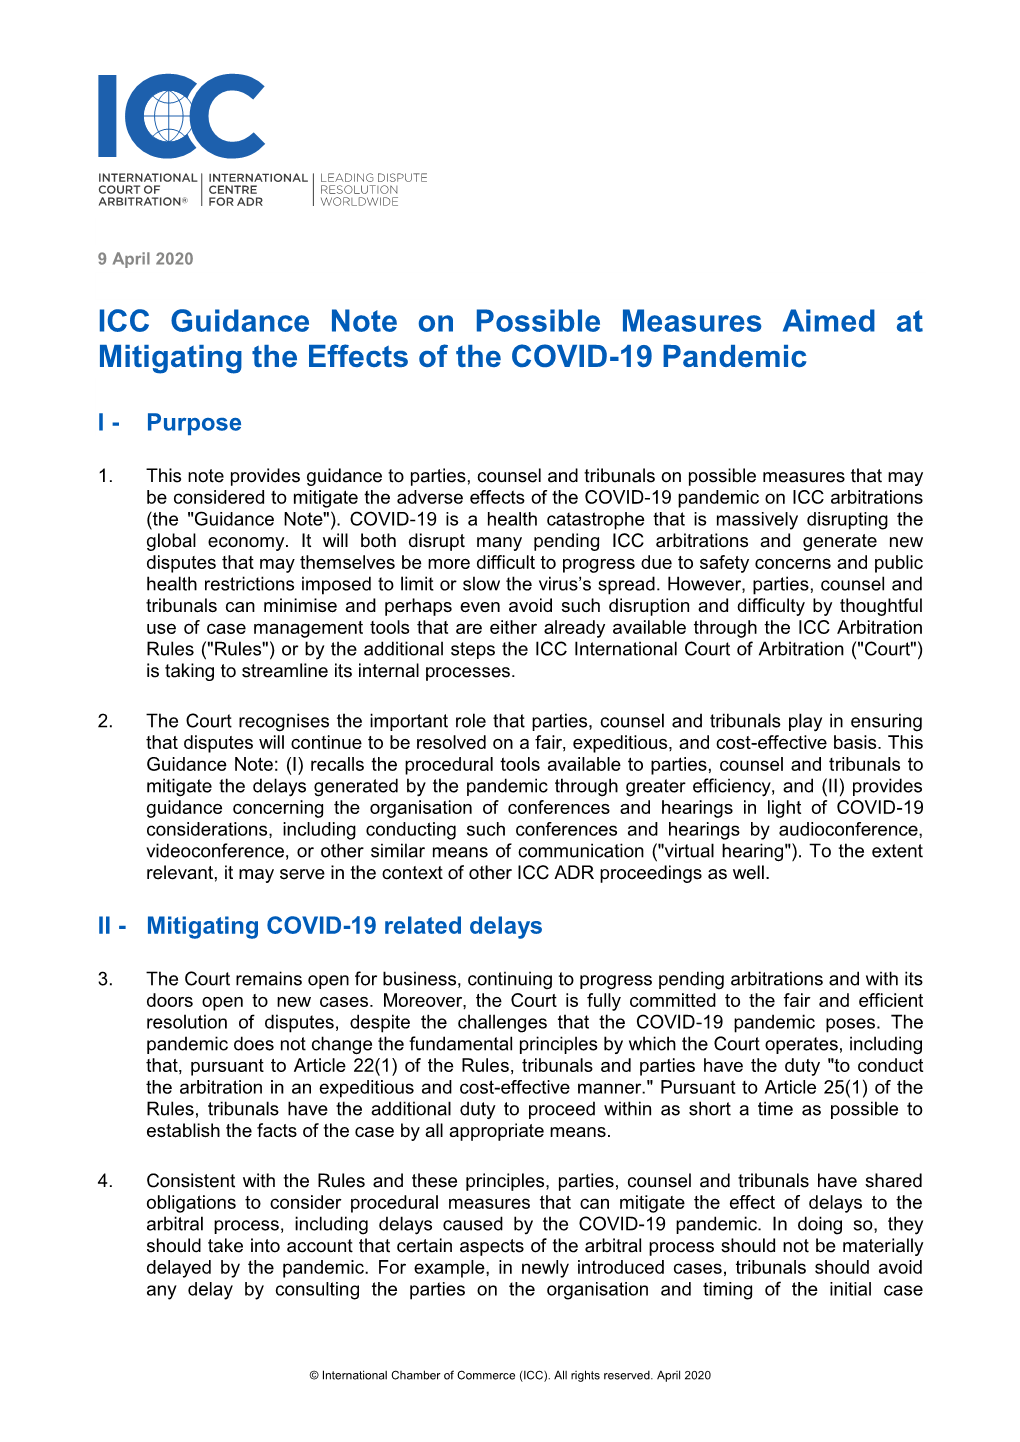 ICC Guidance Note on Possible Measures Aimed at Mitigating the Effects of the COVID-19 Pandemic